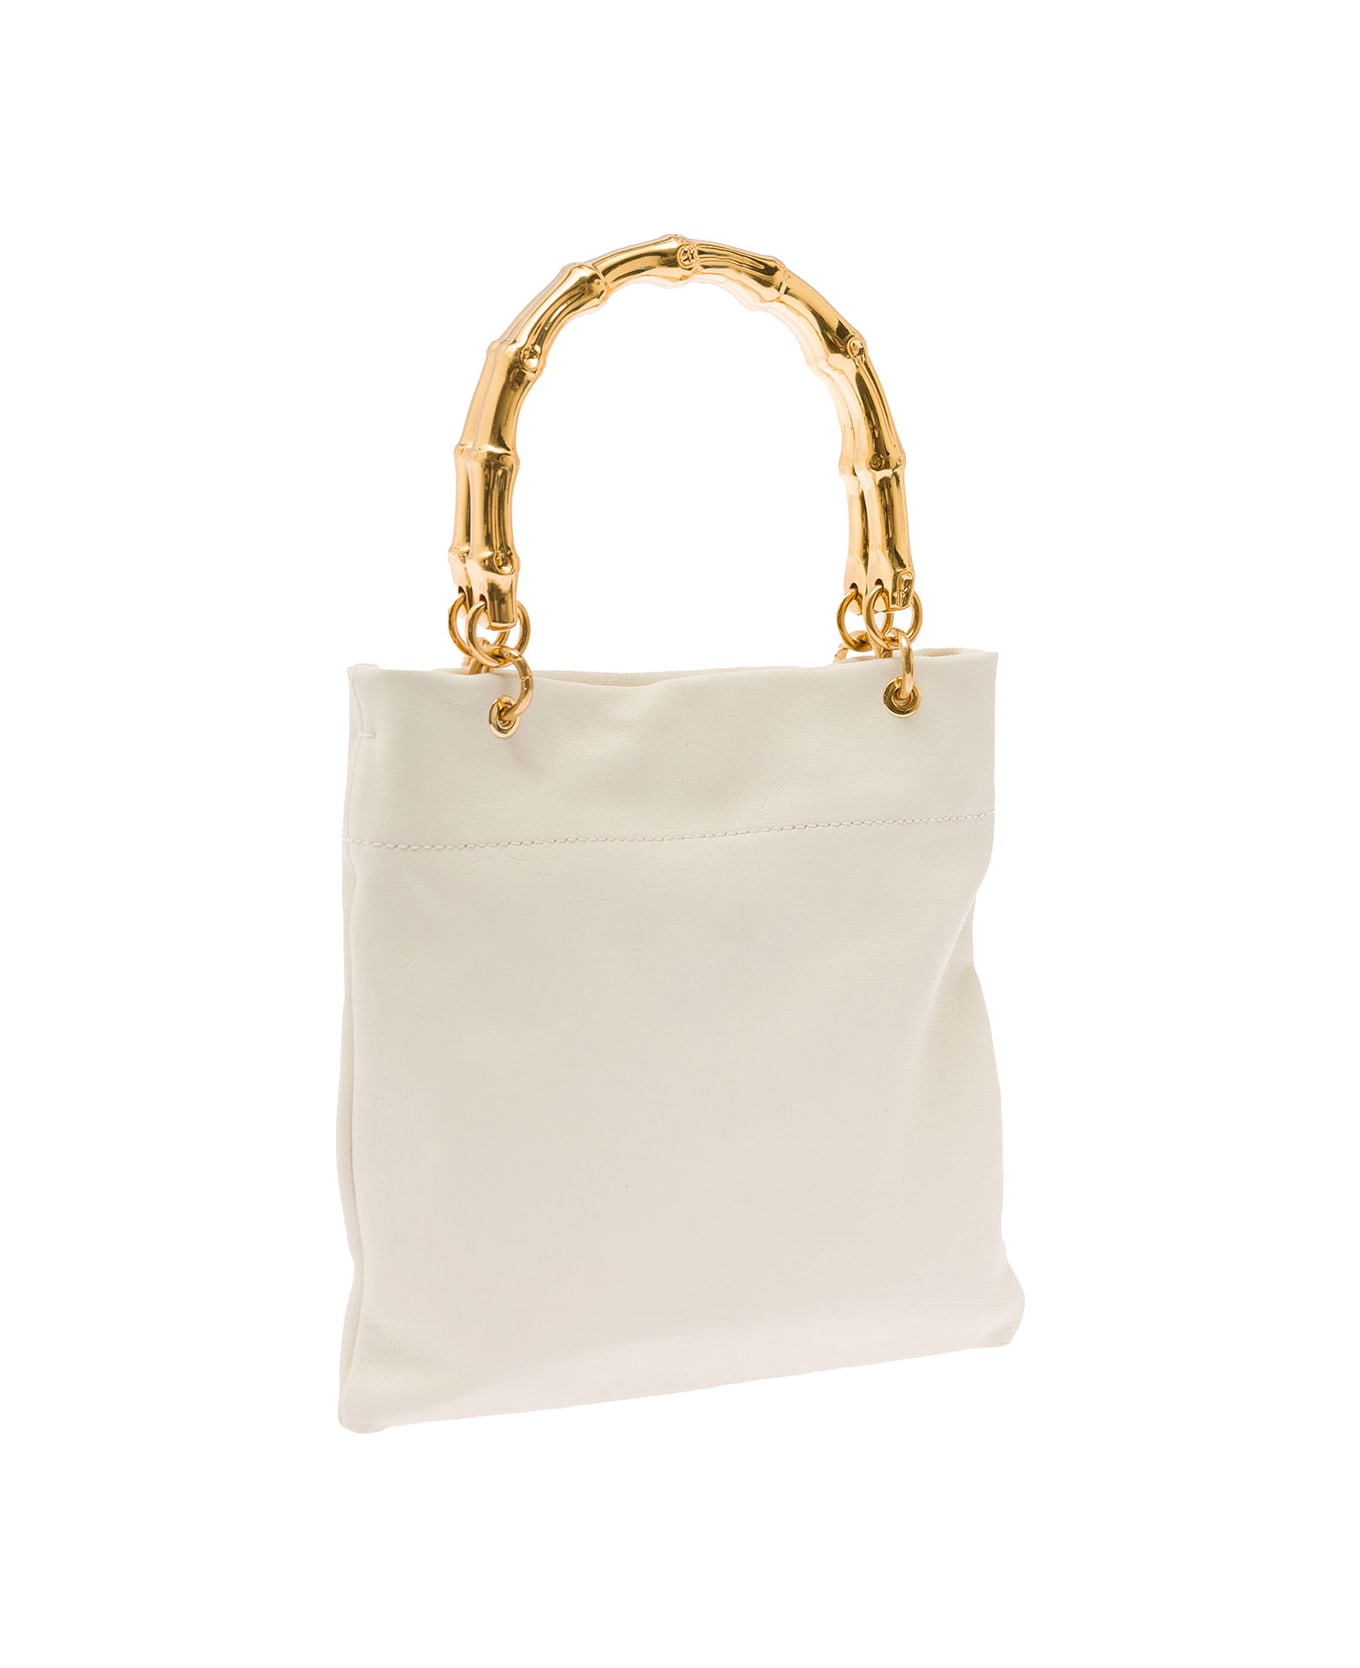 Jil Sander White Tote Bag With Bamboo Style Handles In Leather Woman - White